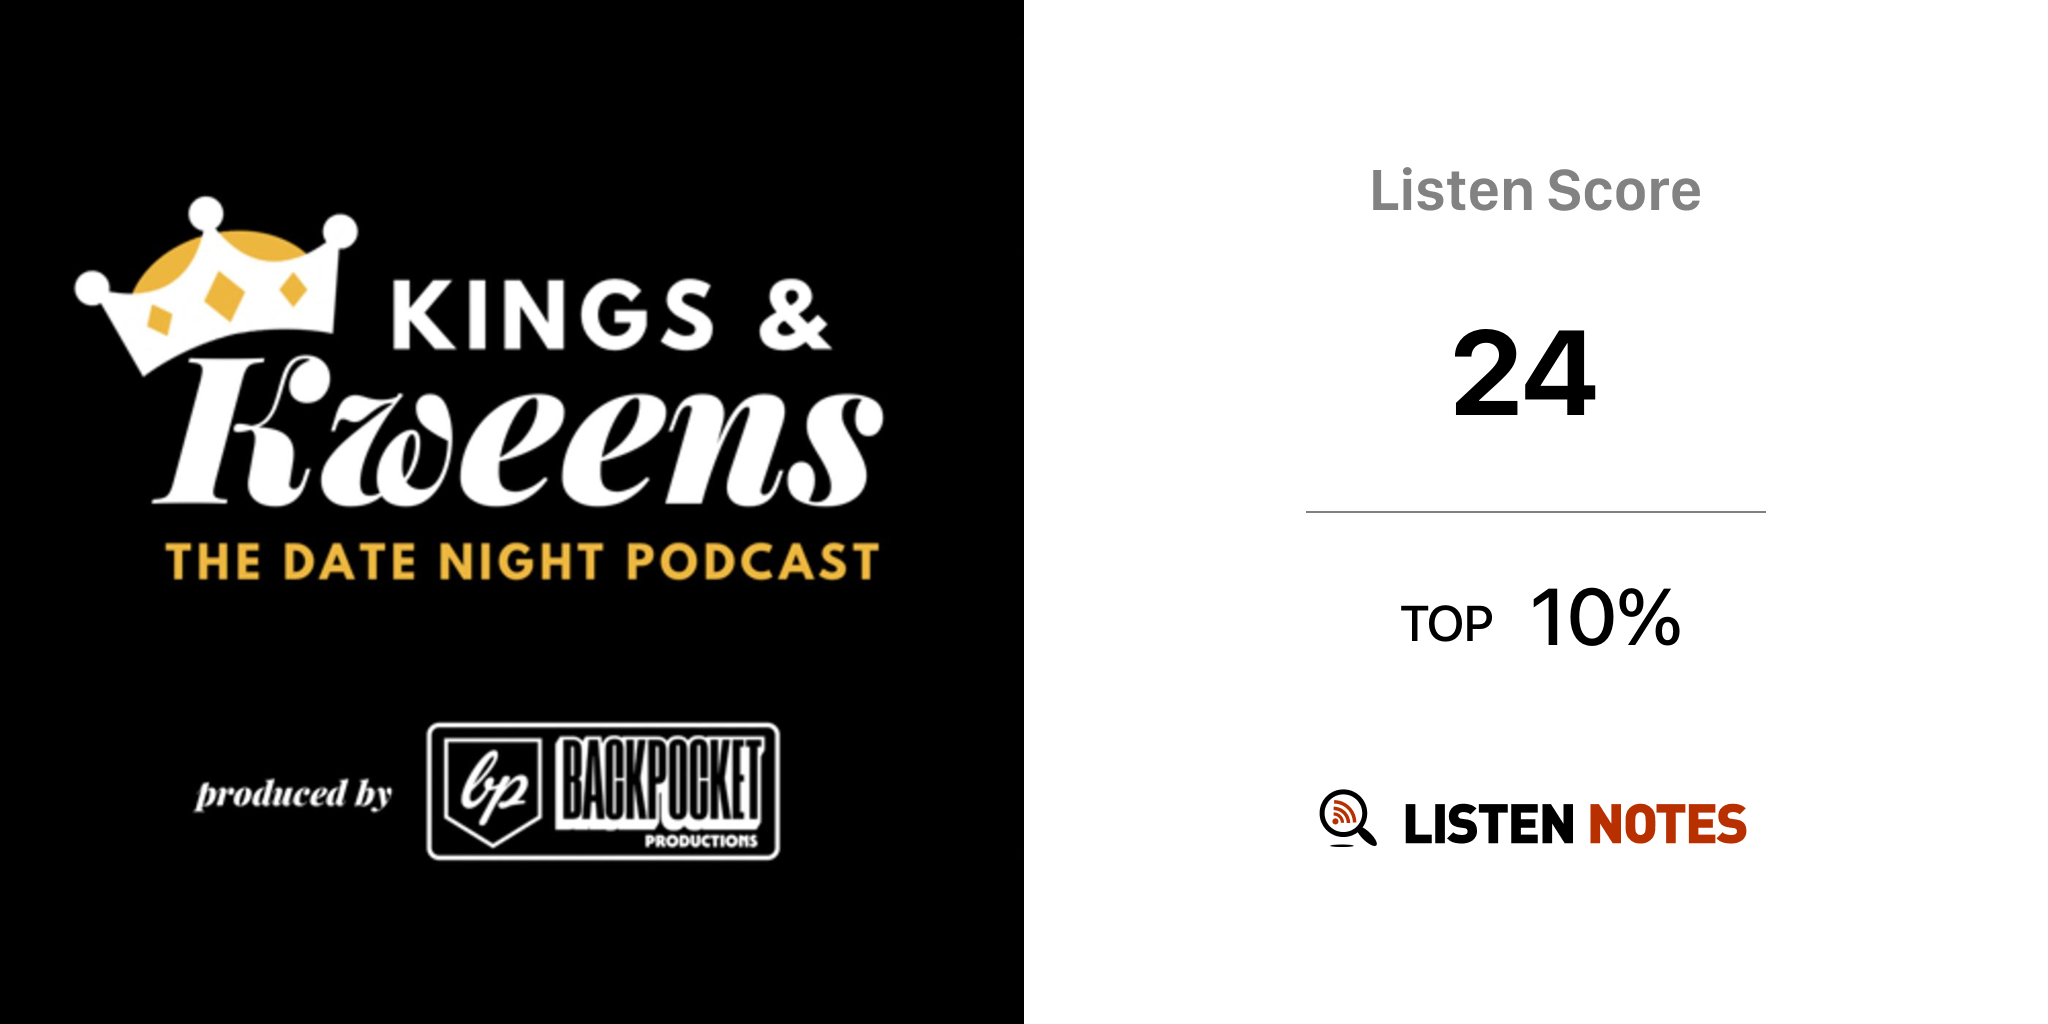 Kings & Kweens: The Date Night Podcast